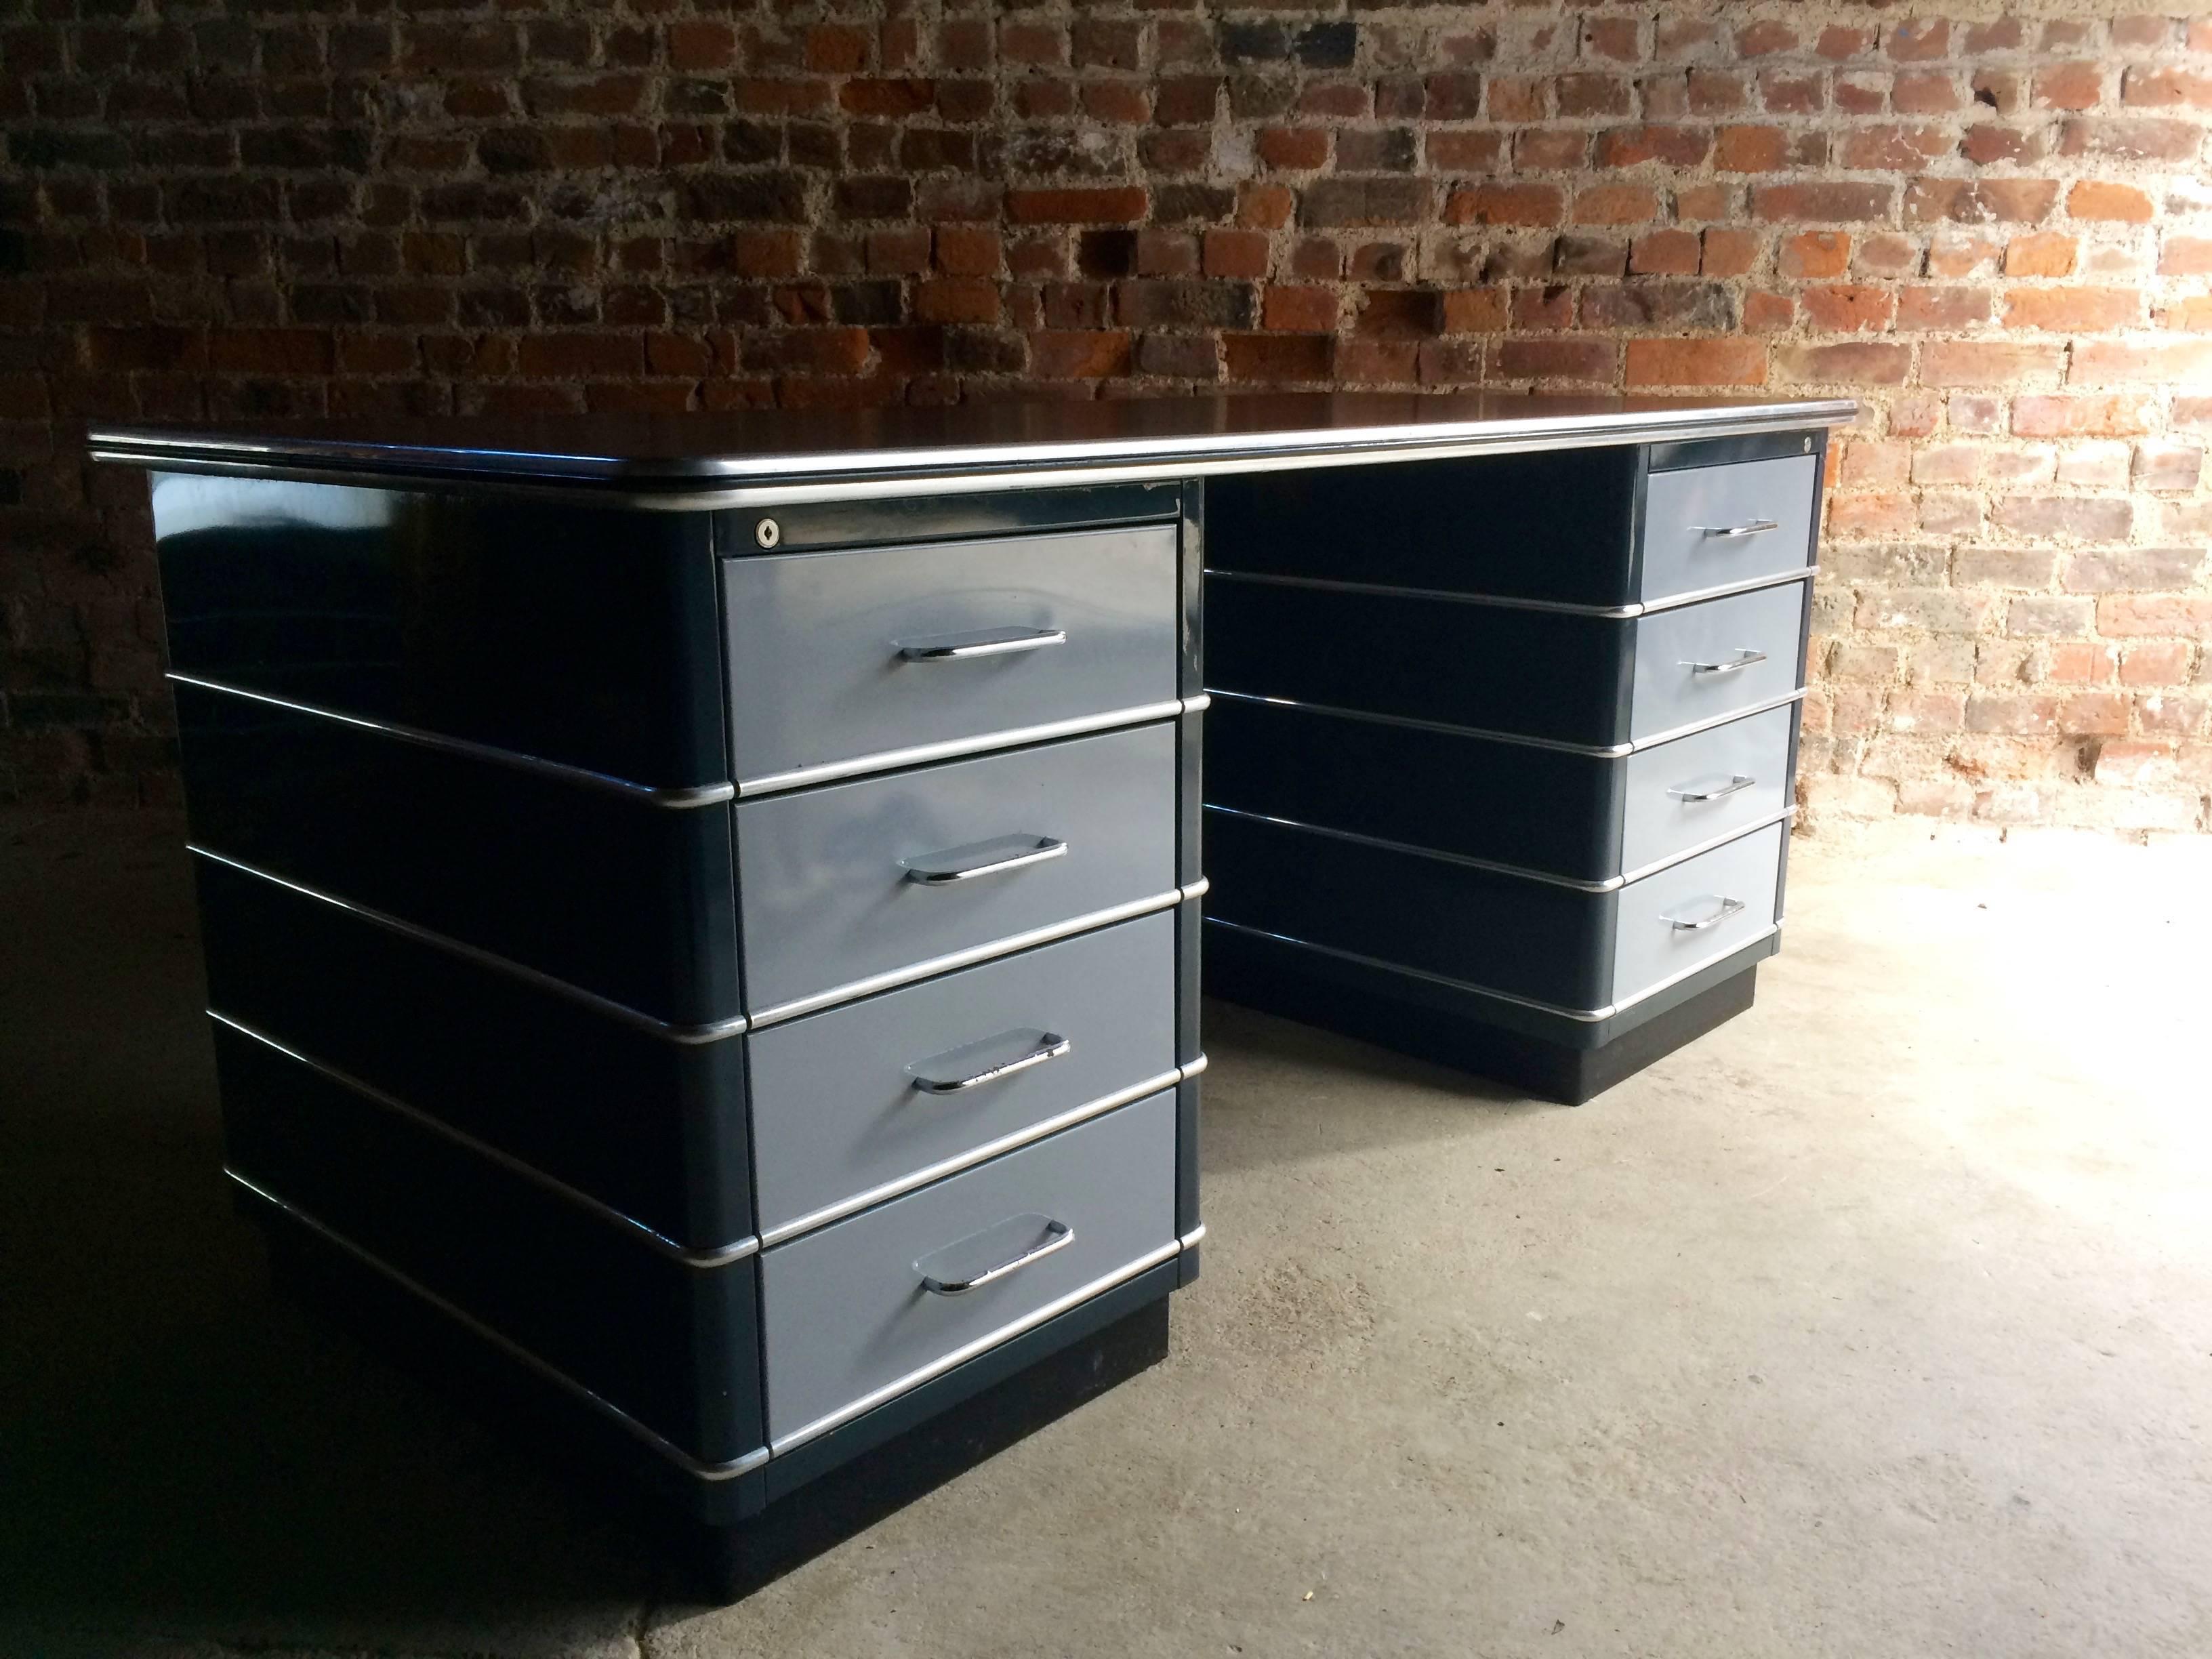 A stunningly beautiful Muller Chrysler Classic Line desk, finished in a beautiful two-tone grey. The Classic Line models are an assured statement which goes beyond trends and fashion - elegant, with a clear message, functional and solid. This